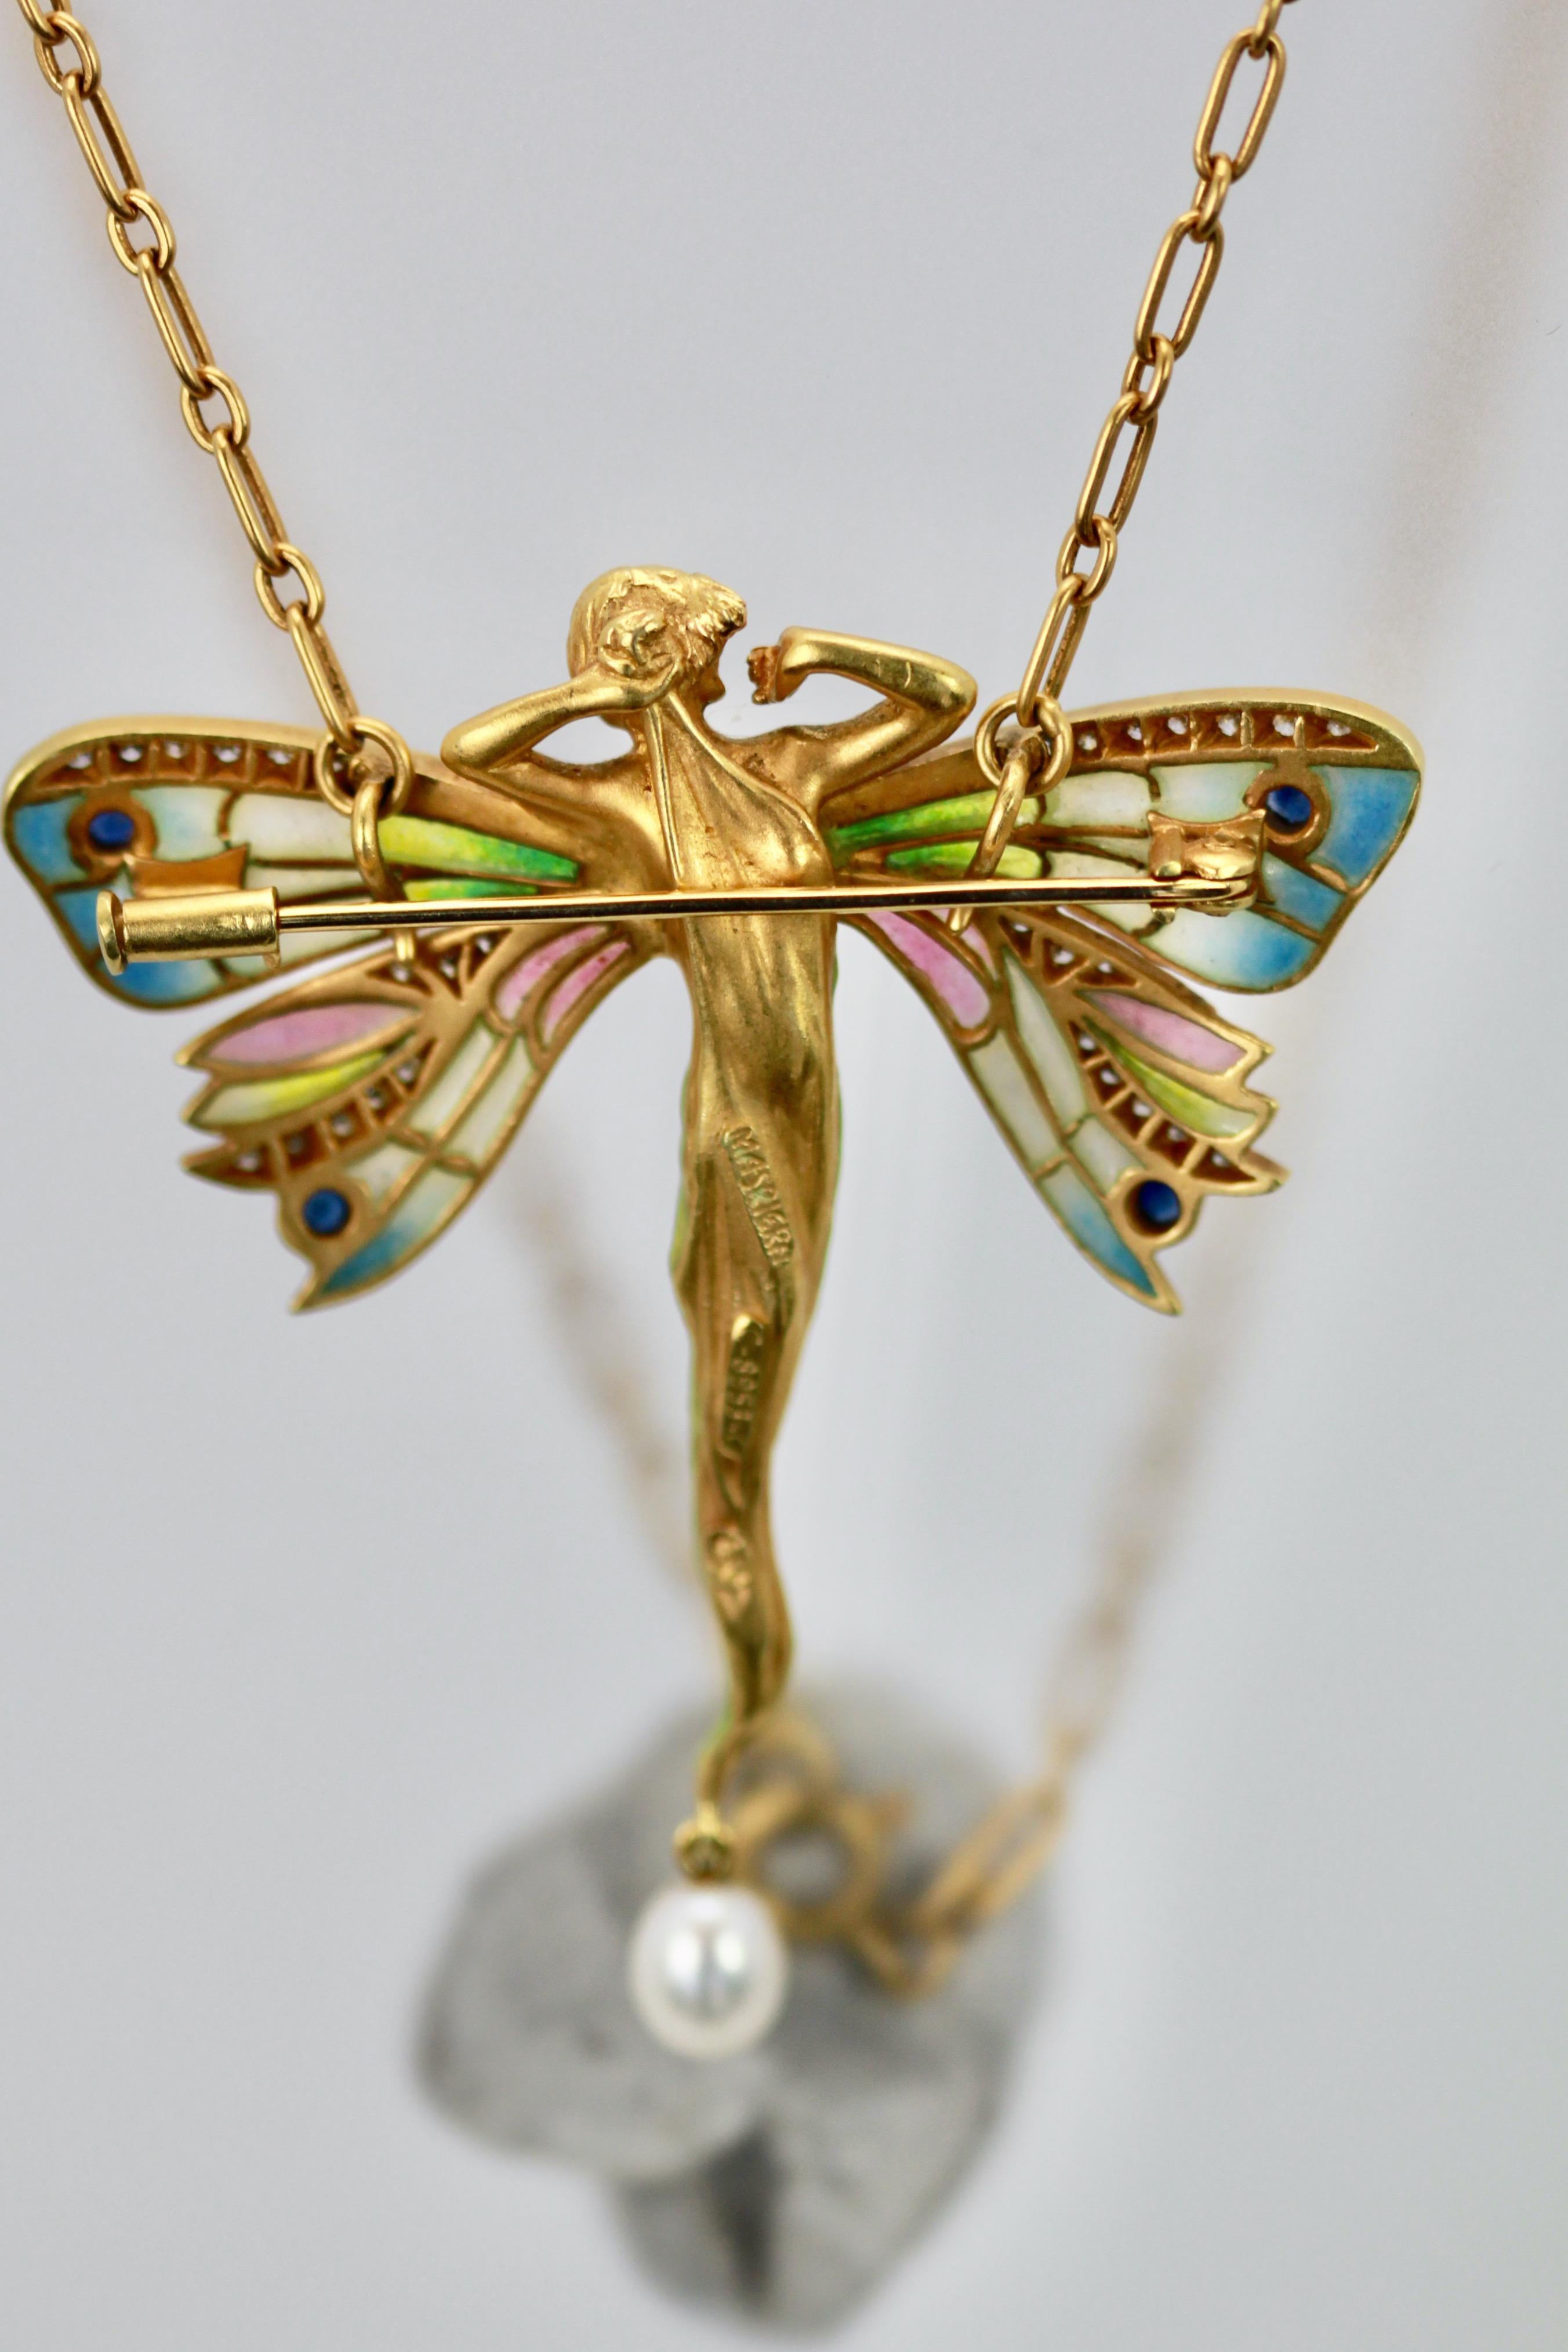 Masriera Plique a Jour Winged Lady Brooch and Pendant 5